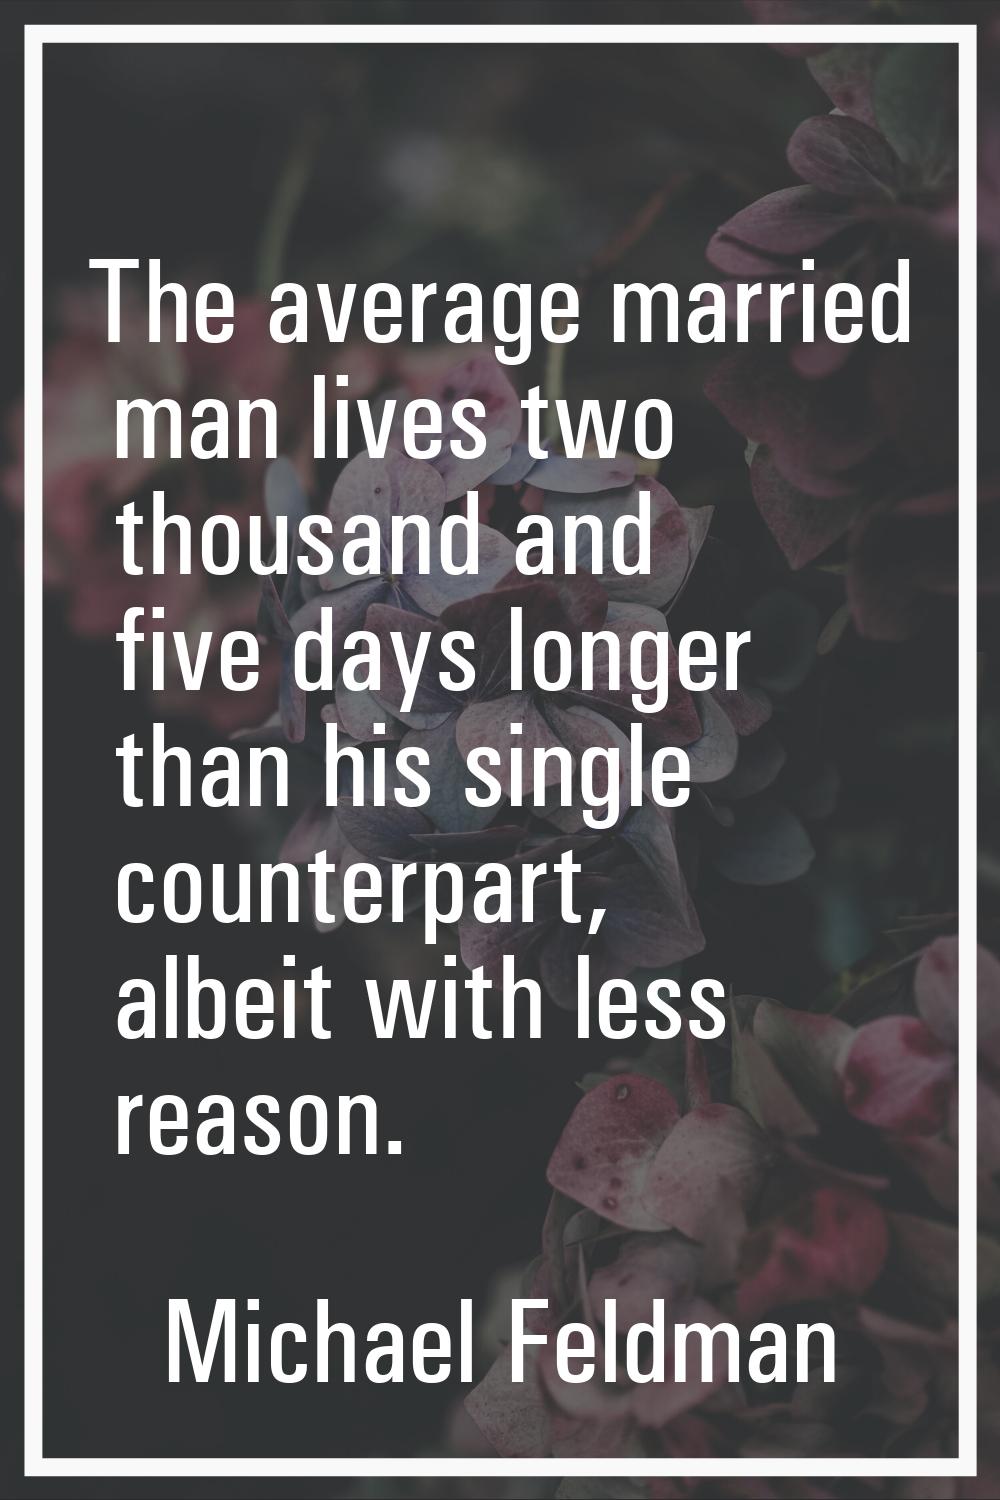 The average married man lives two thousand and five days longer than his single counterpart, albeit